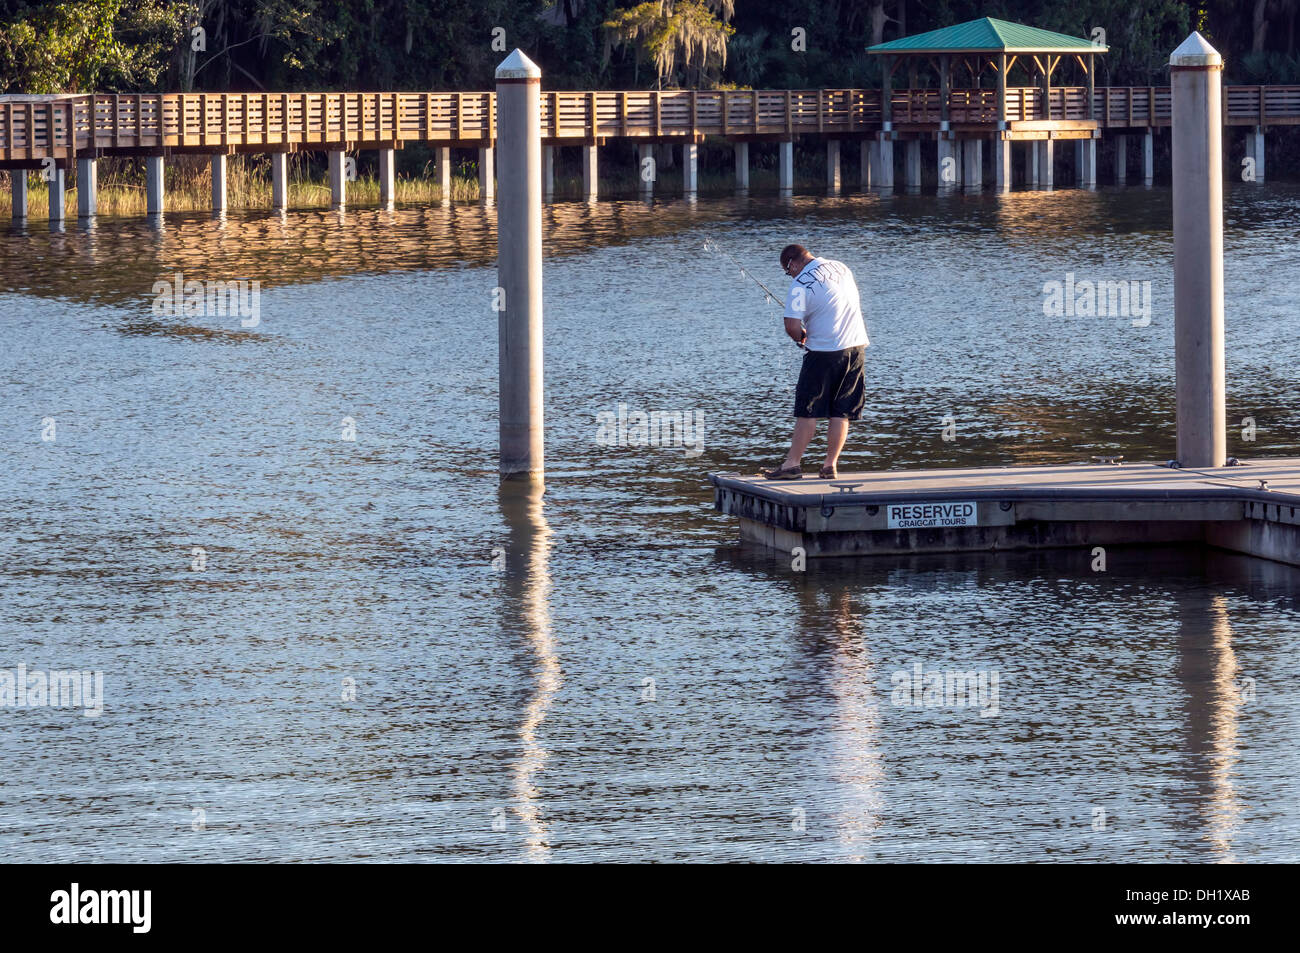 Man with fishing pole fishing from a dock in the Mount Dora harbor in  central Florida, nature trail boardwalk visible beyond Stock Photo - Alamy